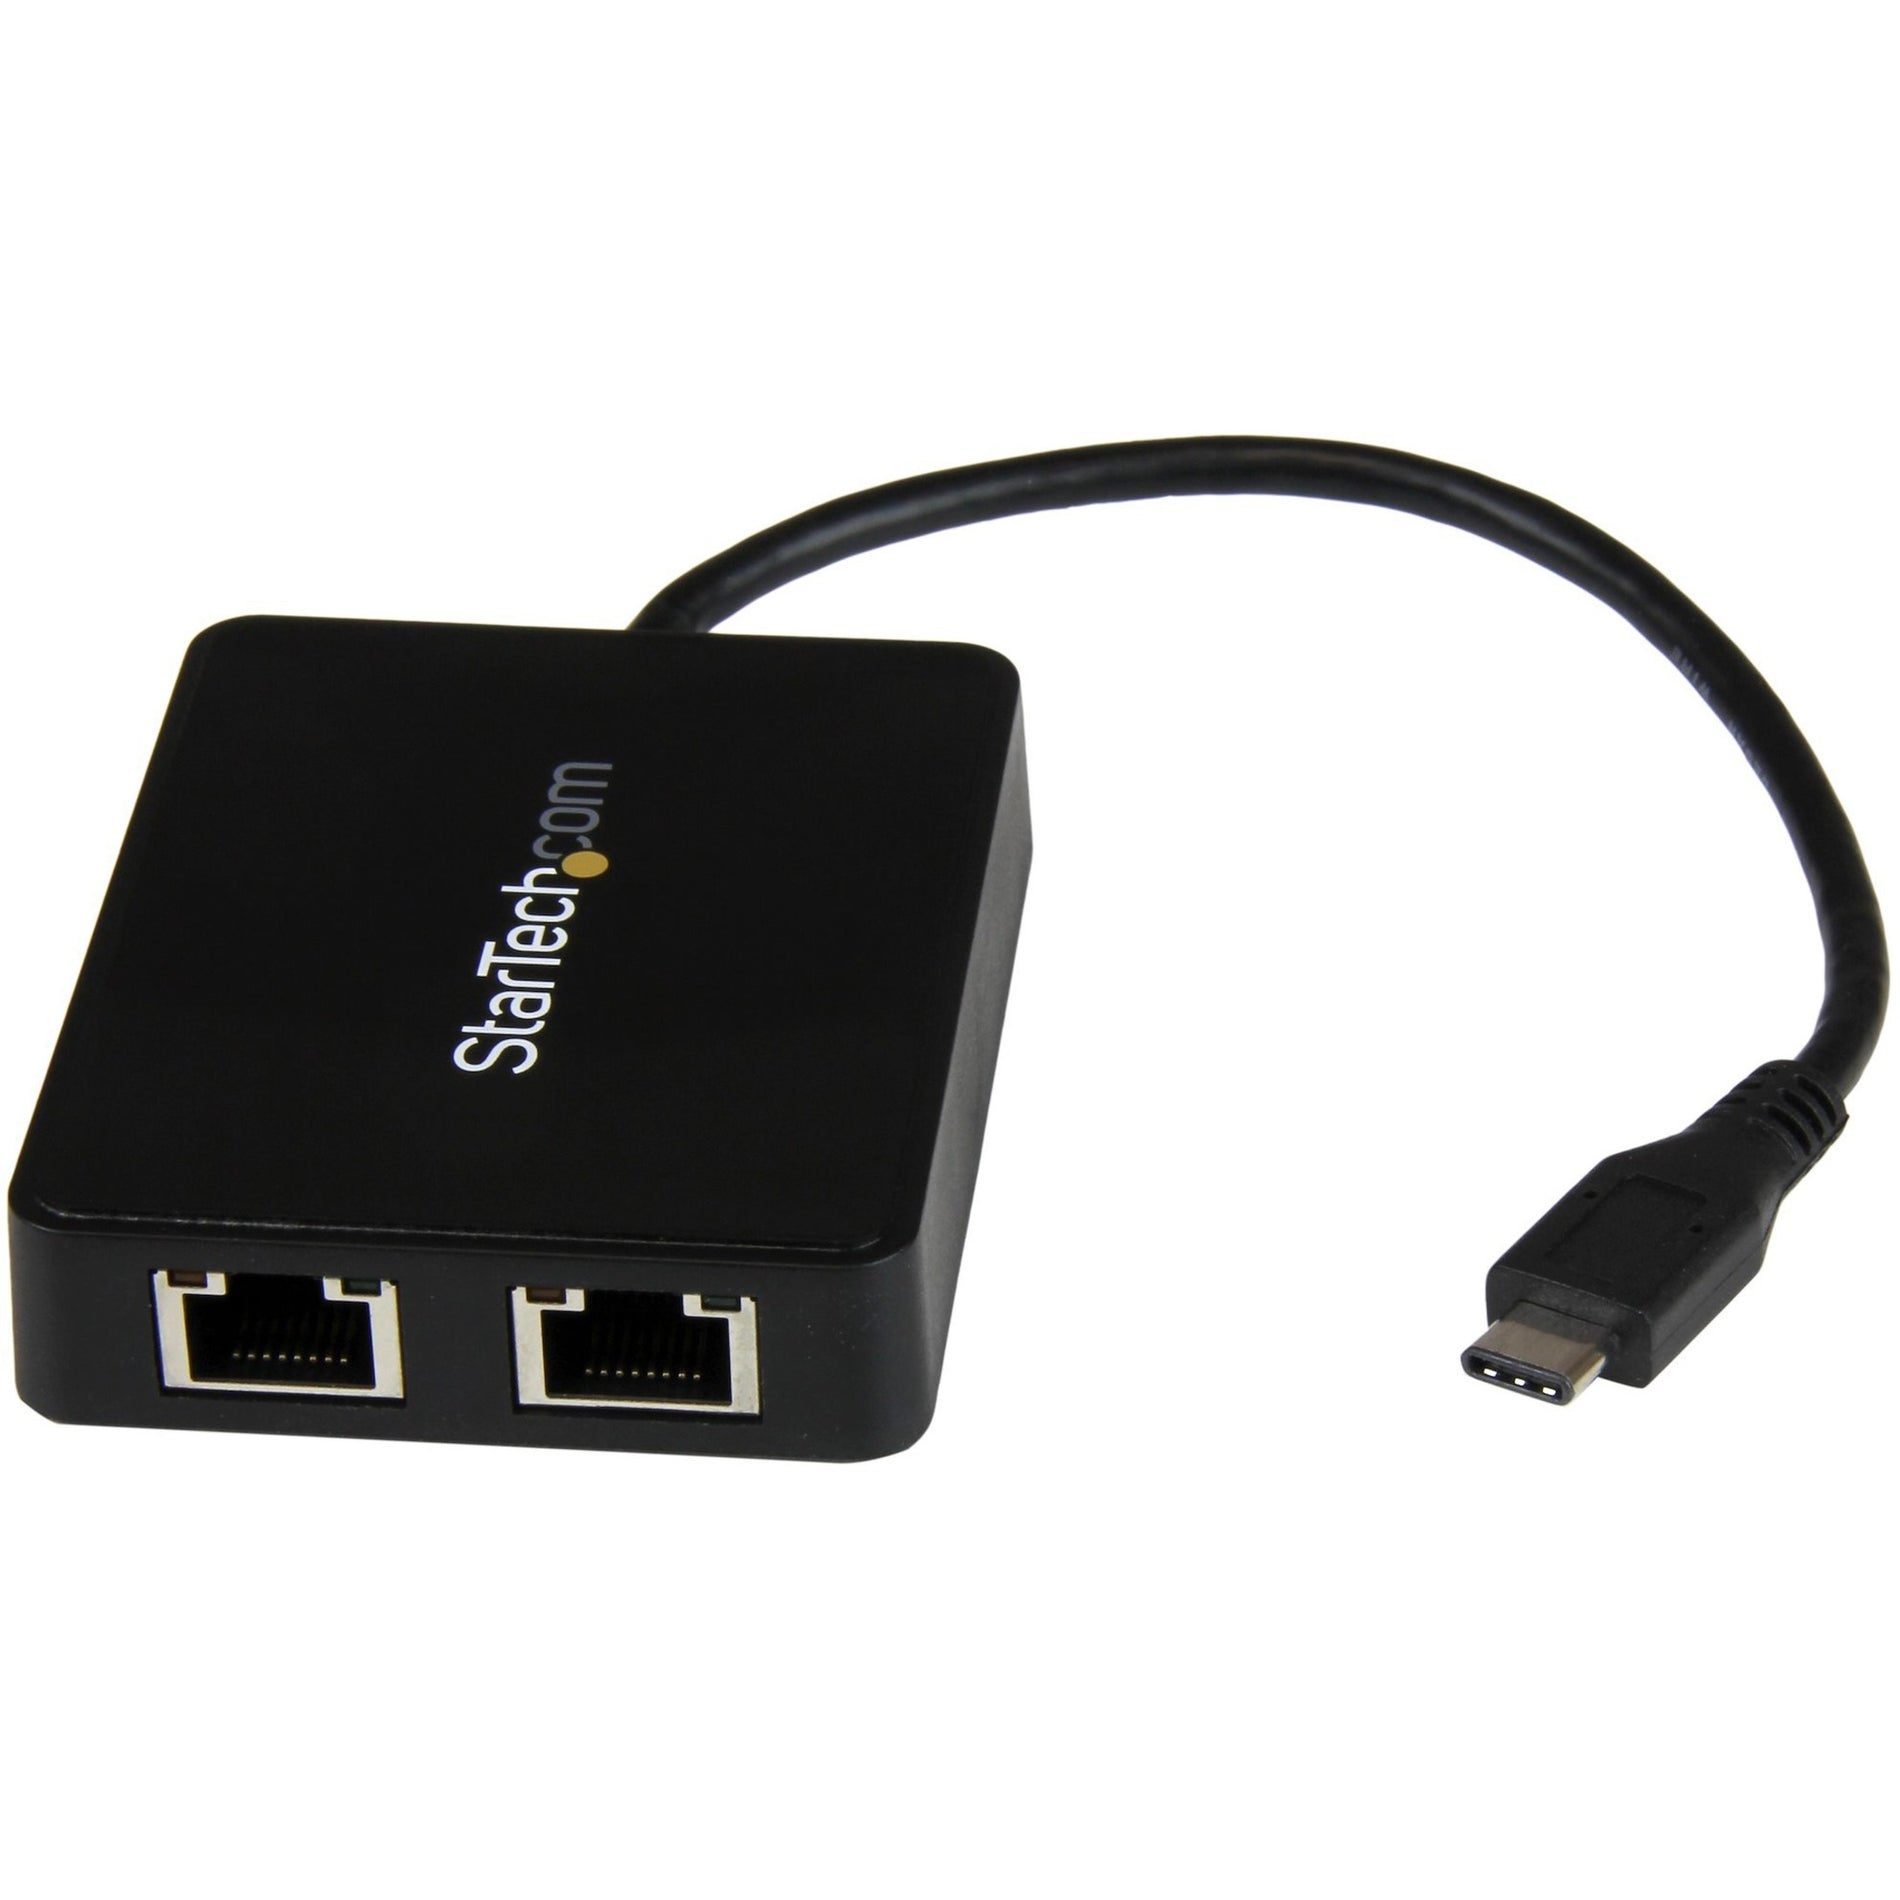 StarTech.com US1GC301AU2R USB-C to Dual Gigabit Ethernet Adapter with USB 3.0 (Type-A) Port - USB Type-C Gigabit Network Adapter, High-Speed Internet Connection for Computers/Notebooks